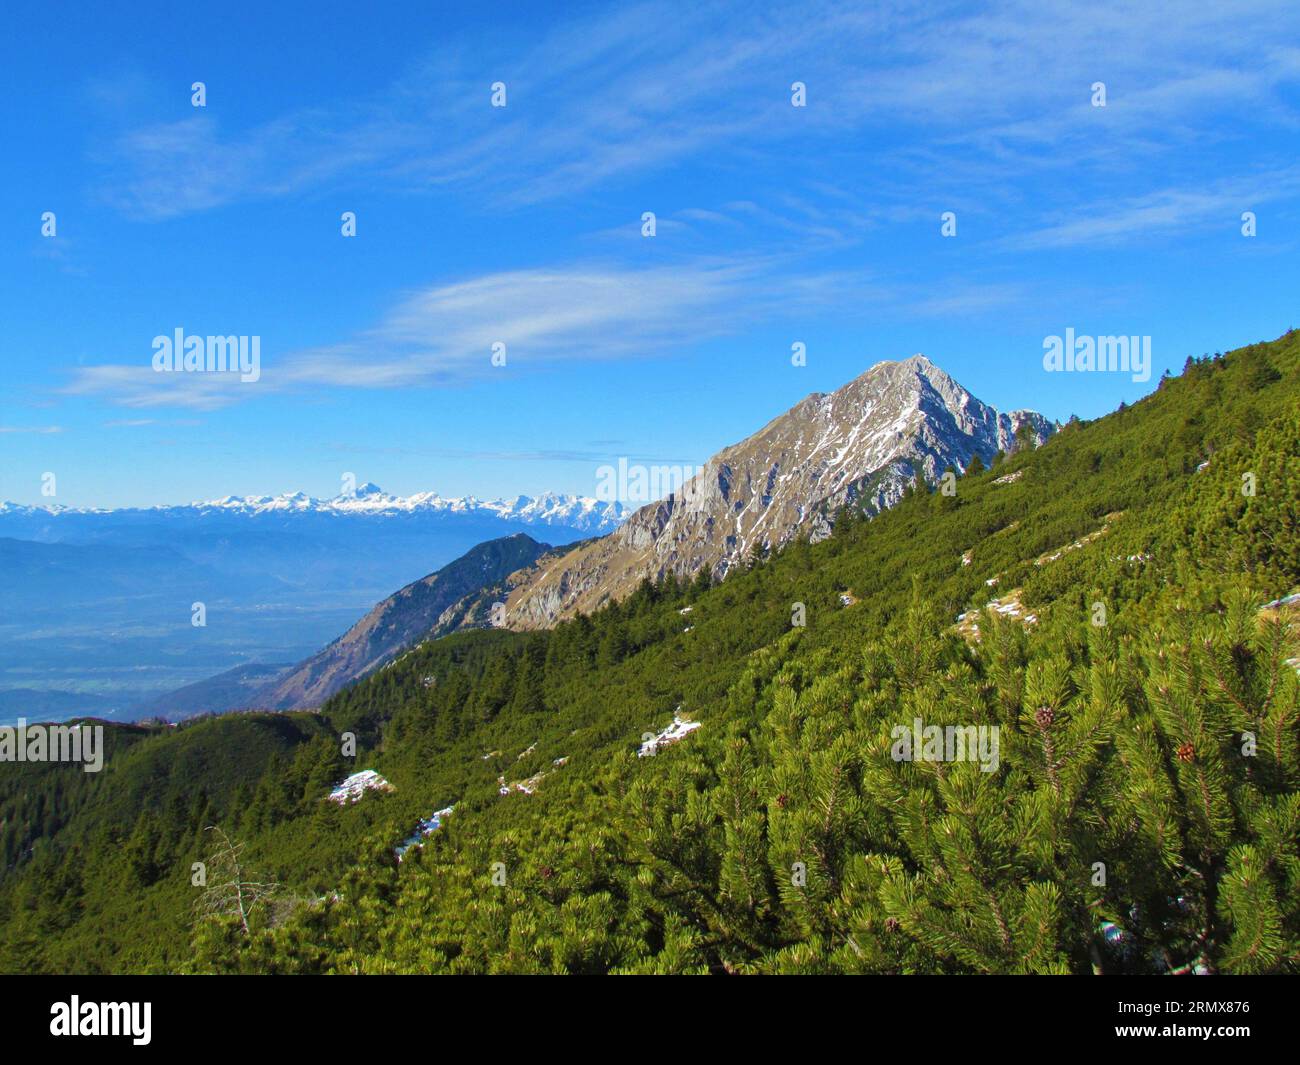 Scenic view of mountain Storzic in Kamnik-Savinja alps in Gorenjska region of Slovenia with creeping pine covering the slopes in the front and mountai Stock Photo